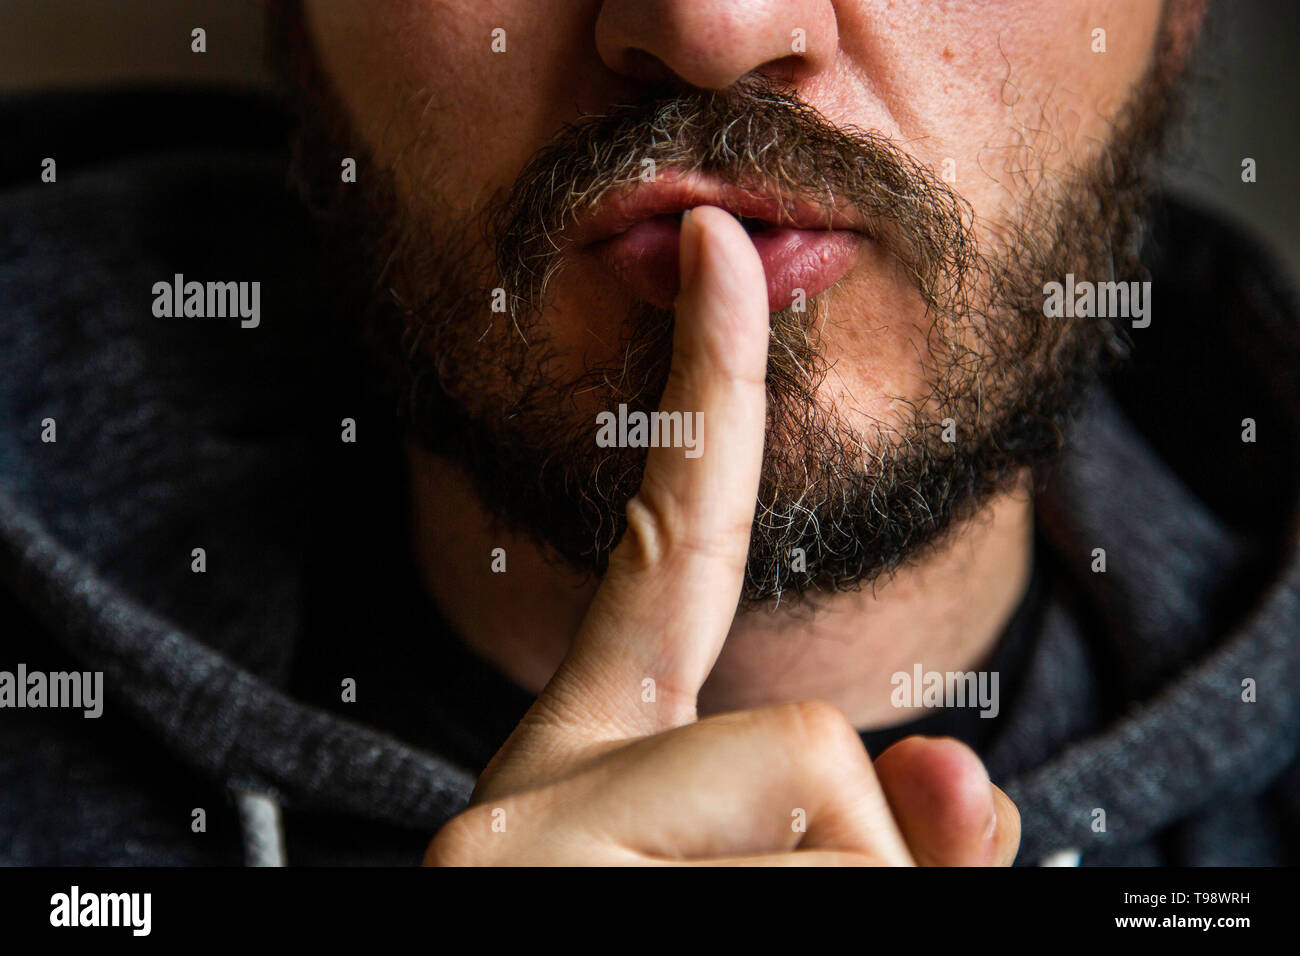 Don't speak, be quiet - close up portrait of bearded man on the door saying shhh. Finger on lips. Head and shoulders, no eyes. Danger. Stock Photo